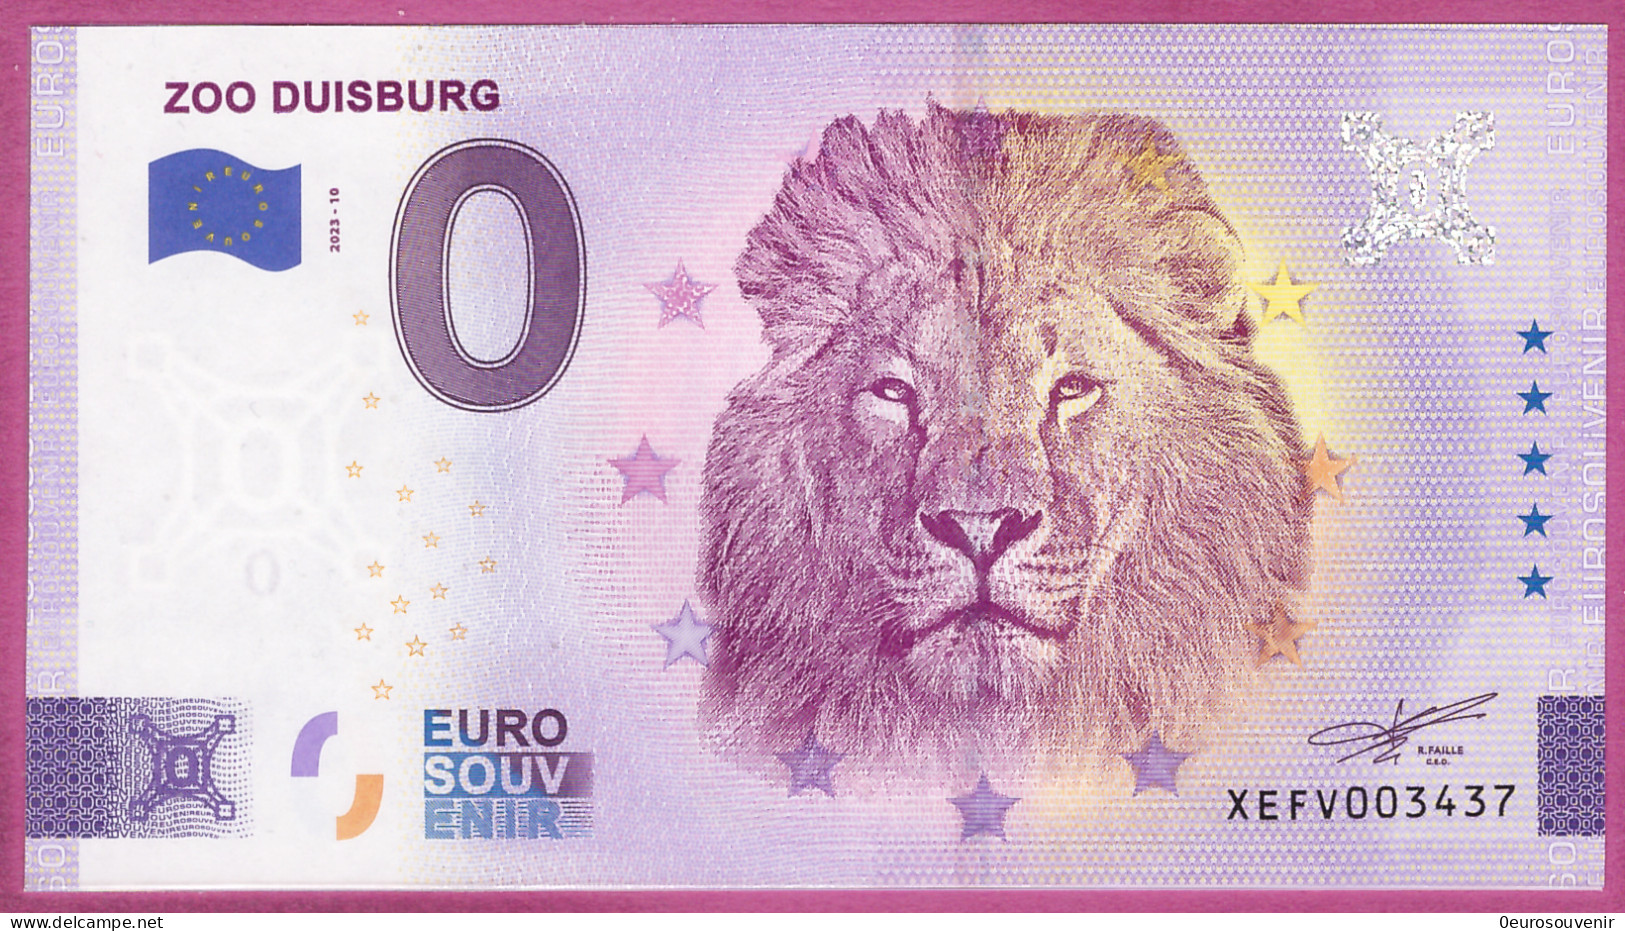 0-Euro XEFV 2023-10 ZOO DUISBURG - Private Proofs / Unofficial